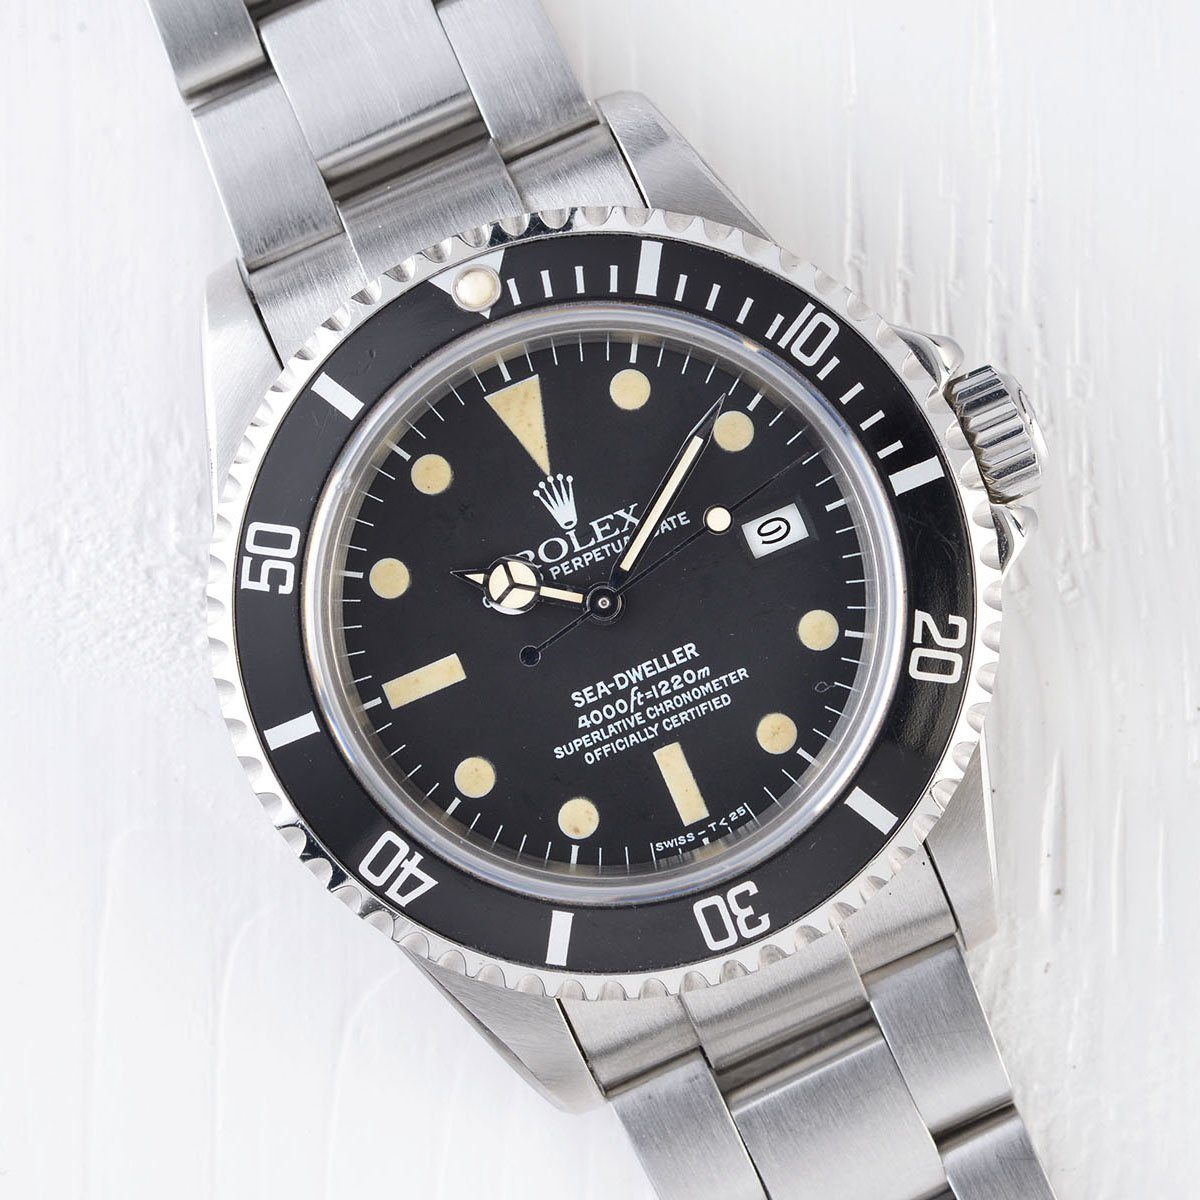 ROLEX 16660 SEADWELLER TRANSITIONAL B + P – Bulang and